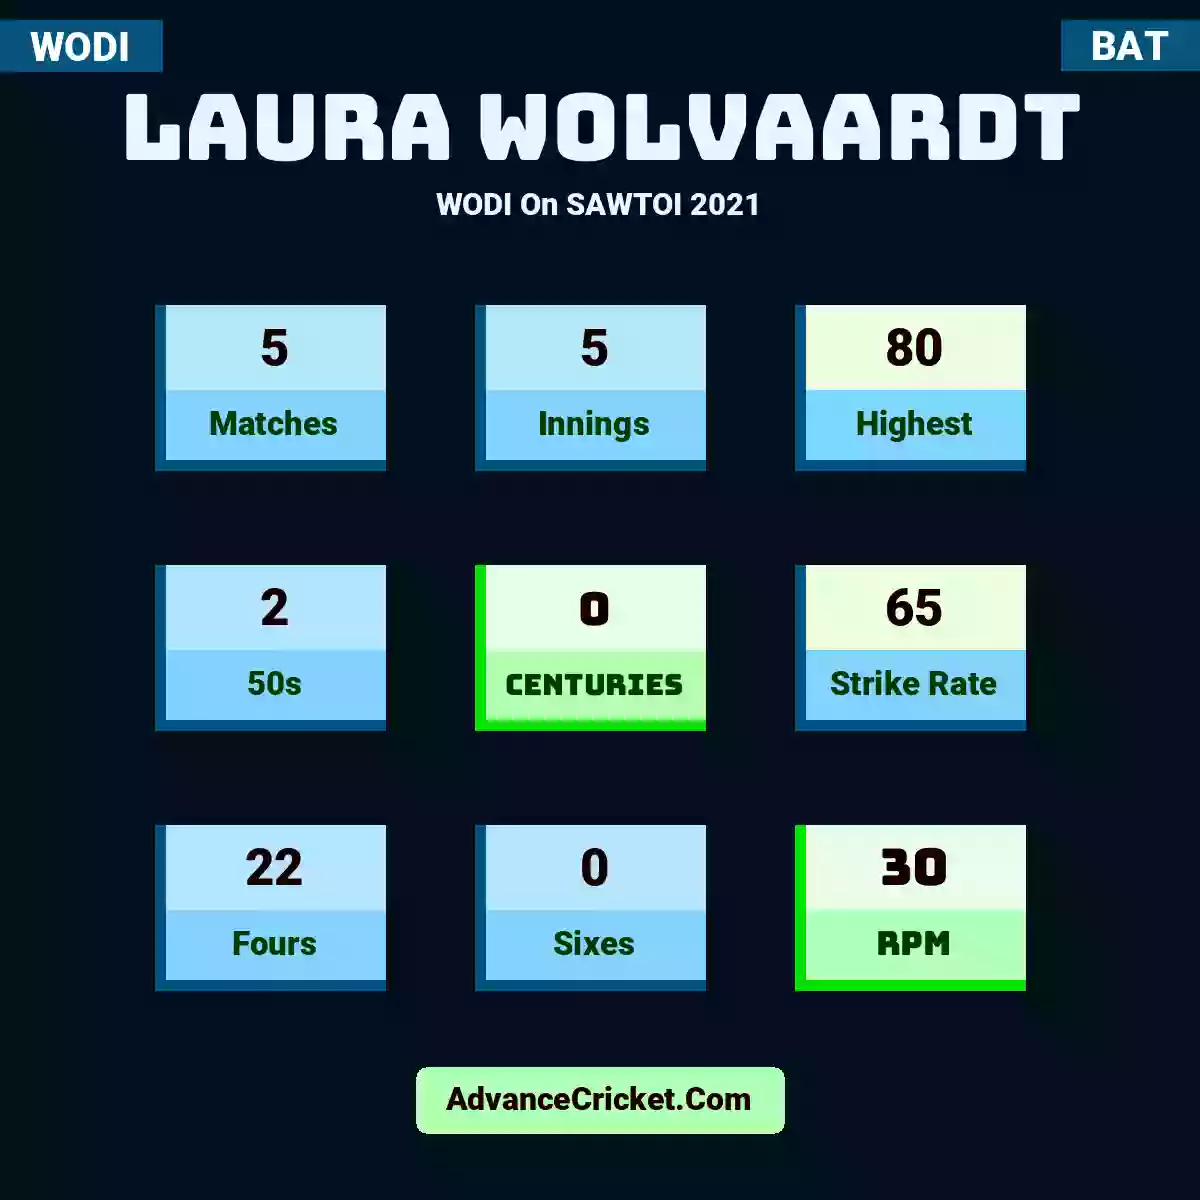 Laura Wolvaardt WODI  On SAWTOI 2021, Laura Wolvaardt played 5 matches, scored 80 runs as highest, 2 half-centuries, and 0 centuries, with a strike rate of 65. L.Wolvaardt hit 22 fours and 0 sixes, with an RPM of 30.